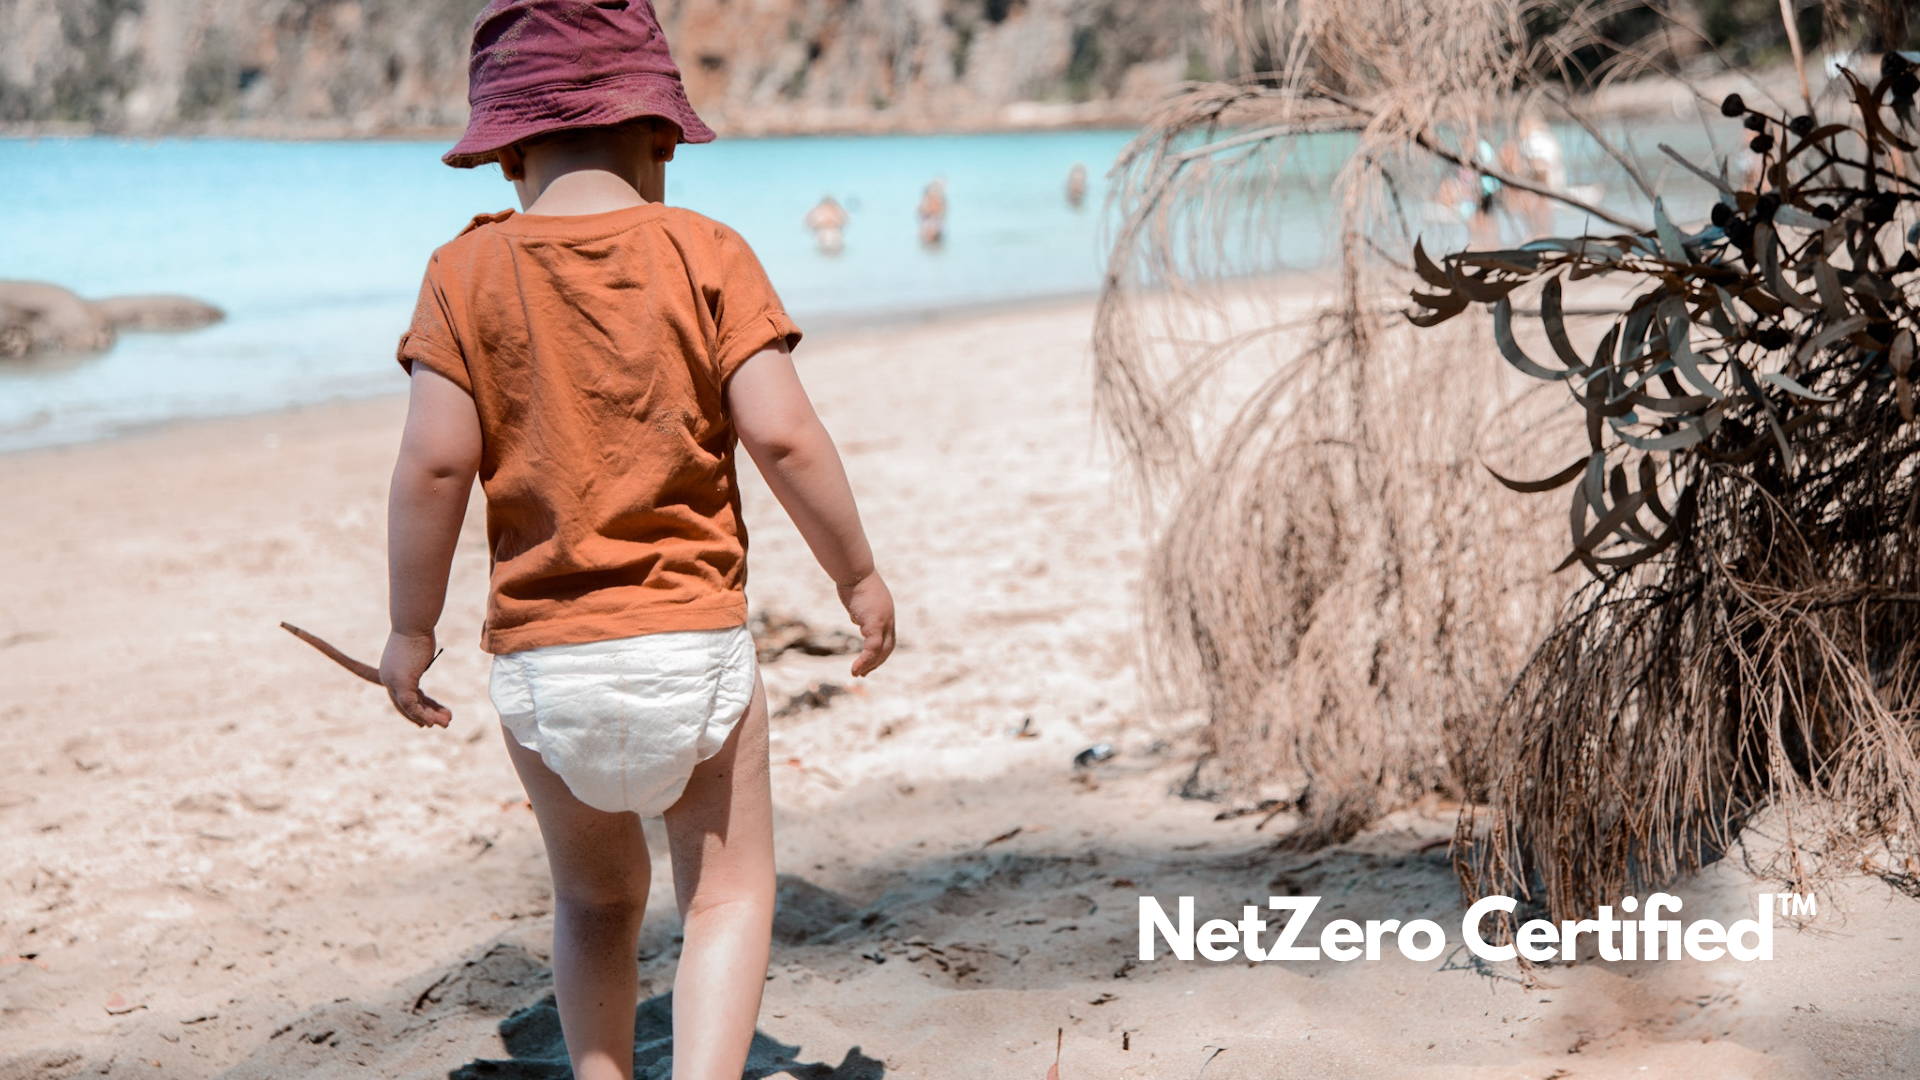 Cuddlies eco nappies and wipes are NetZero Certified. We choose ingredients that are sourced from sustainable resources, we choose packaging that is recyclable or biodegradable and we minimize the use of plastic ingredients in our products. 